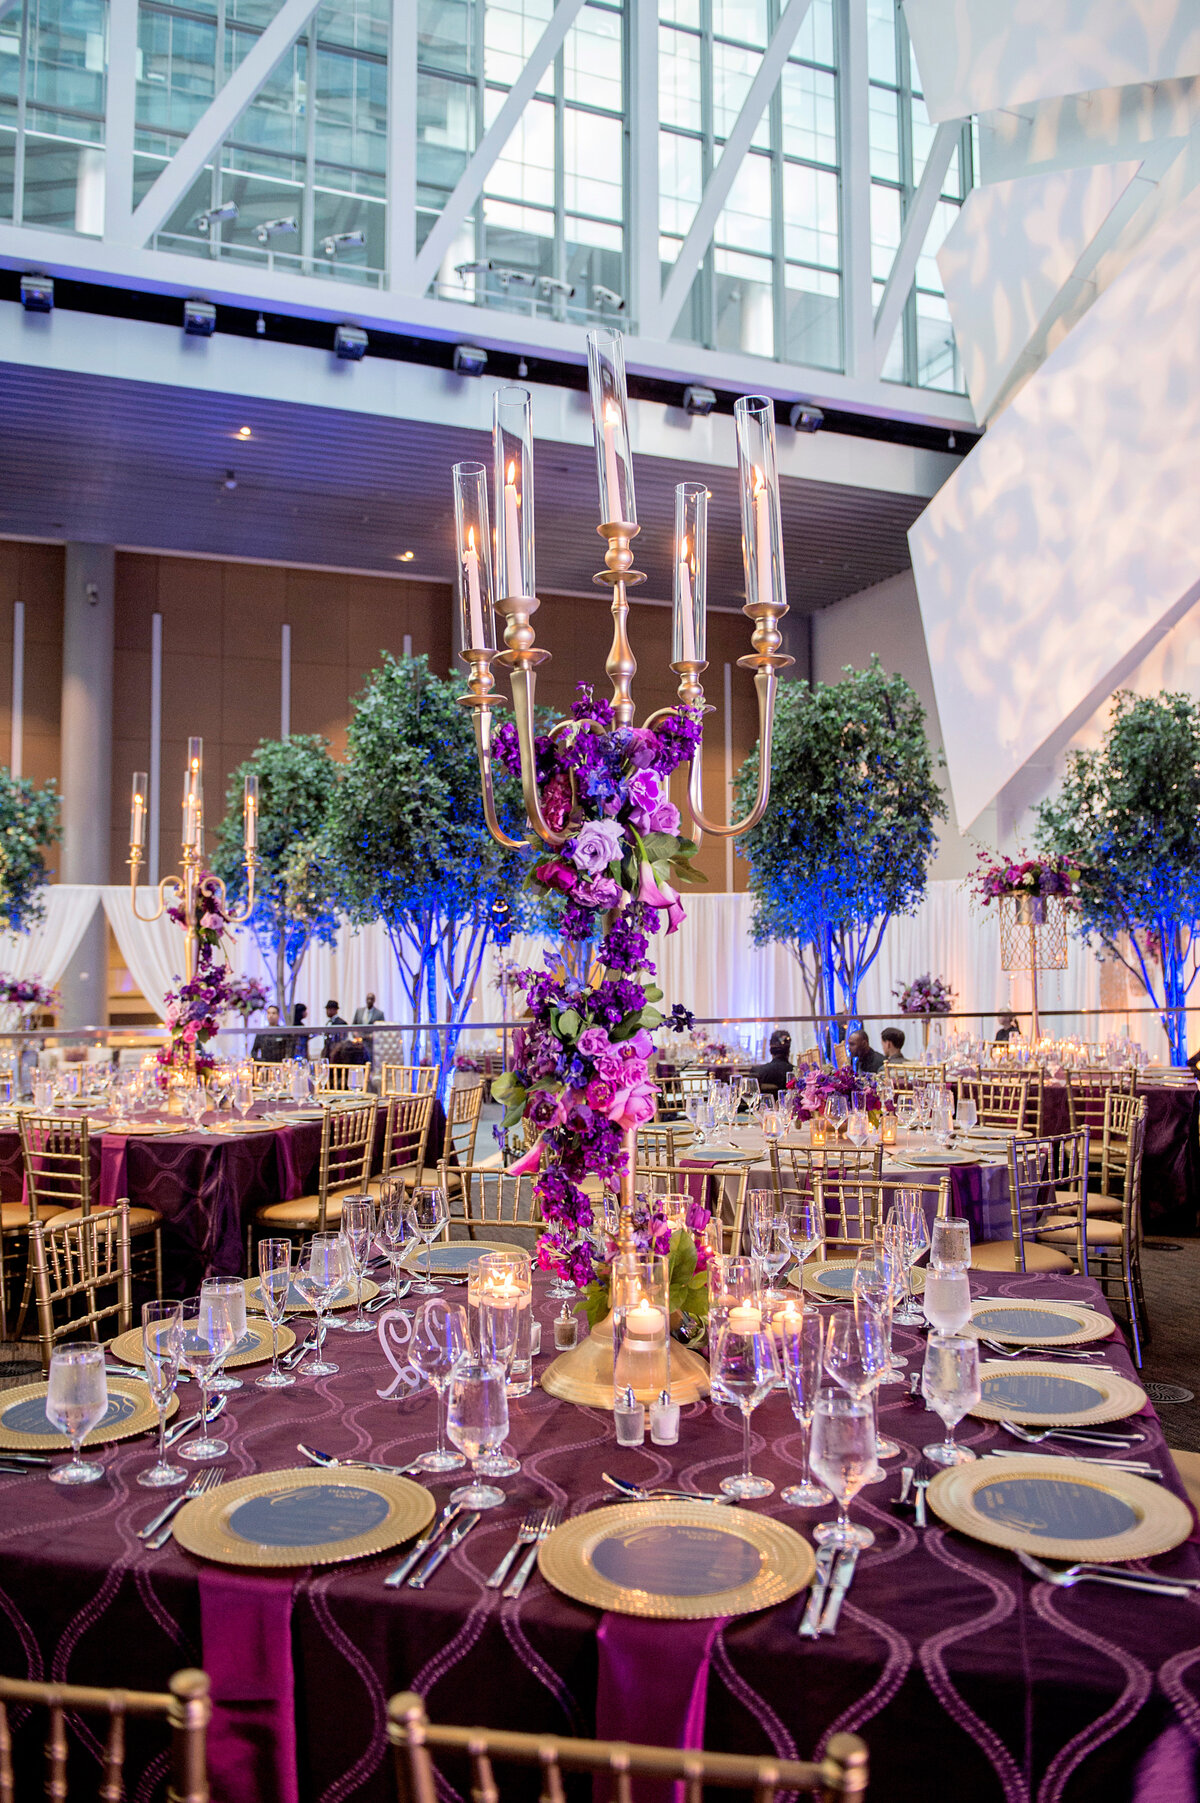 Various featured wedding designs and wedding couples in the best Charlotte Wedding venues and best wedding venues in the Carolinas: Ritz-Carlton Charlotte, Fillmore Charlotte, Foundation for the Carolinas, The Ballantyne Hotel and Lodge, Inn at Palmetto Bluff